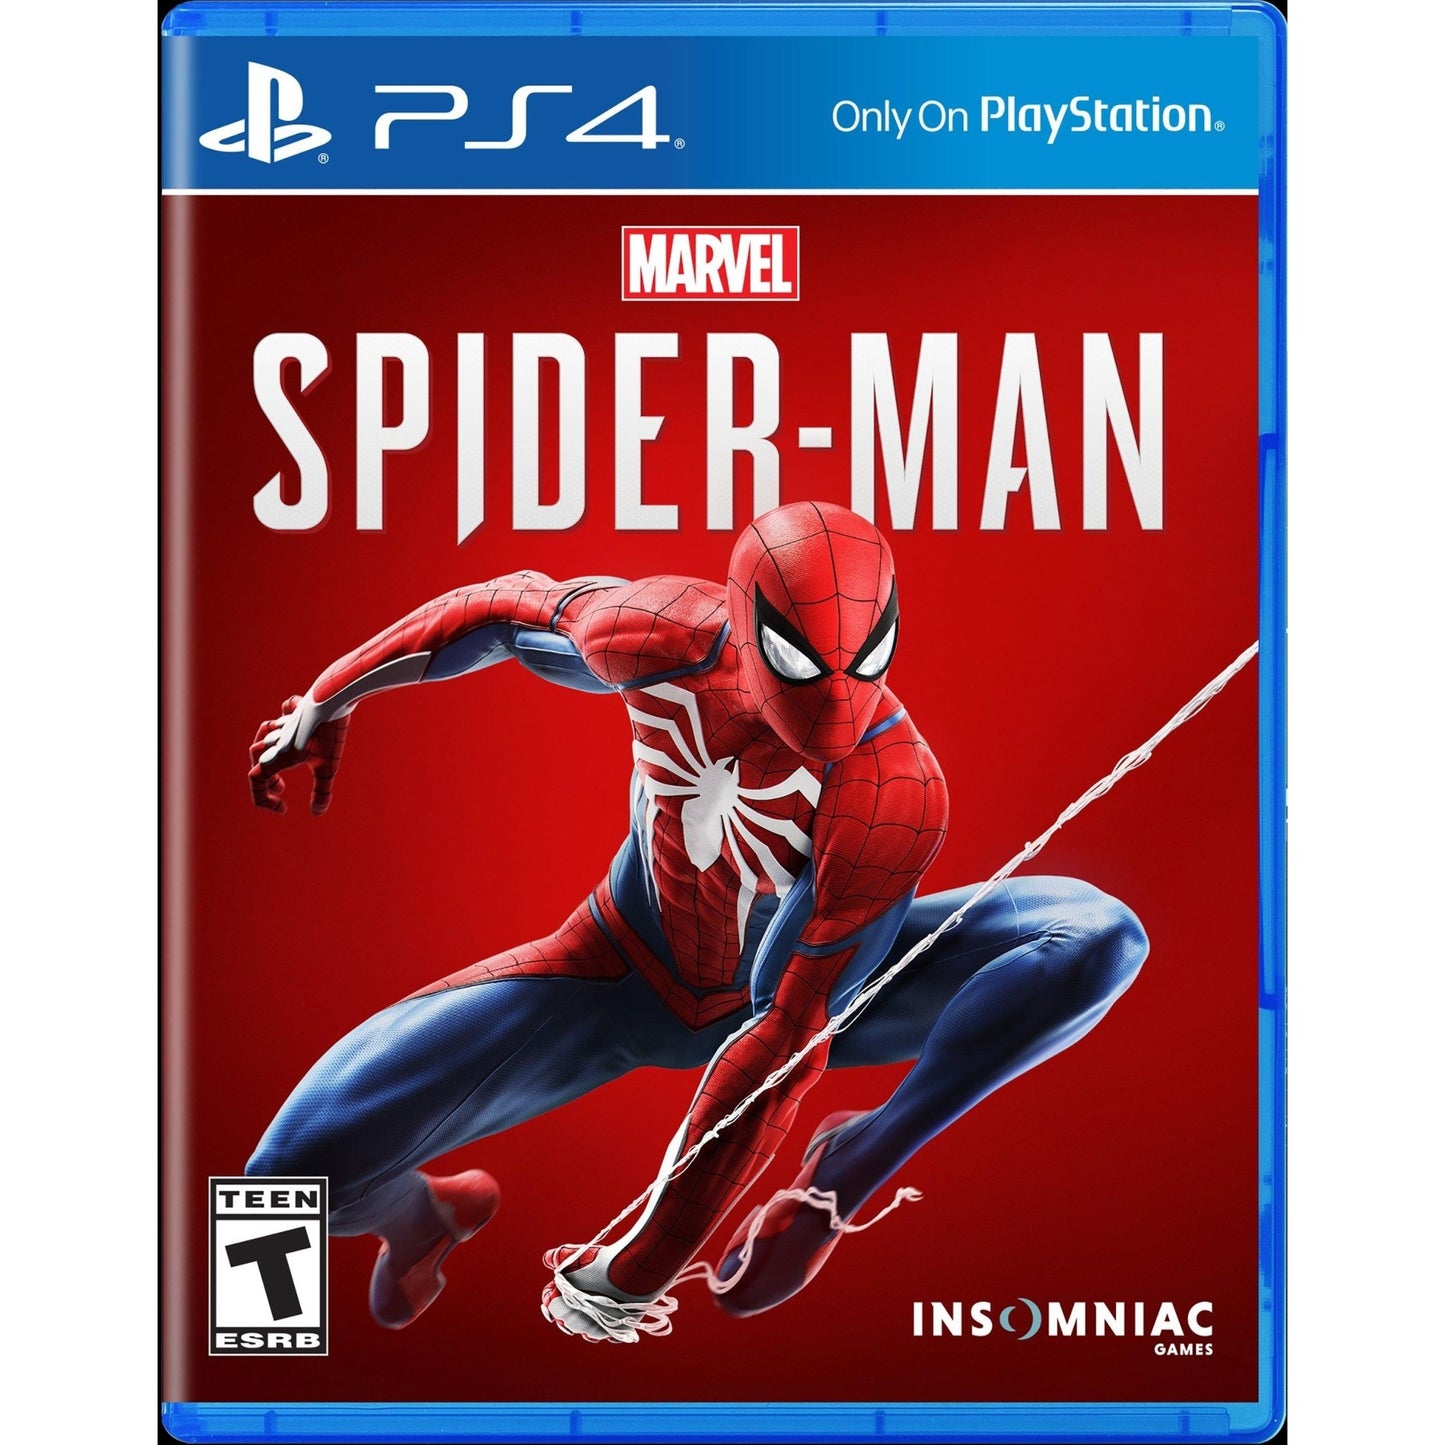 Spider-Man Marvel PS4 PlayStation 4 Game from 2P Gaming